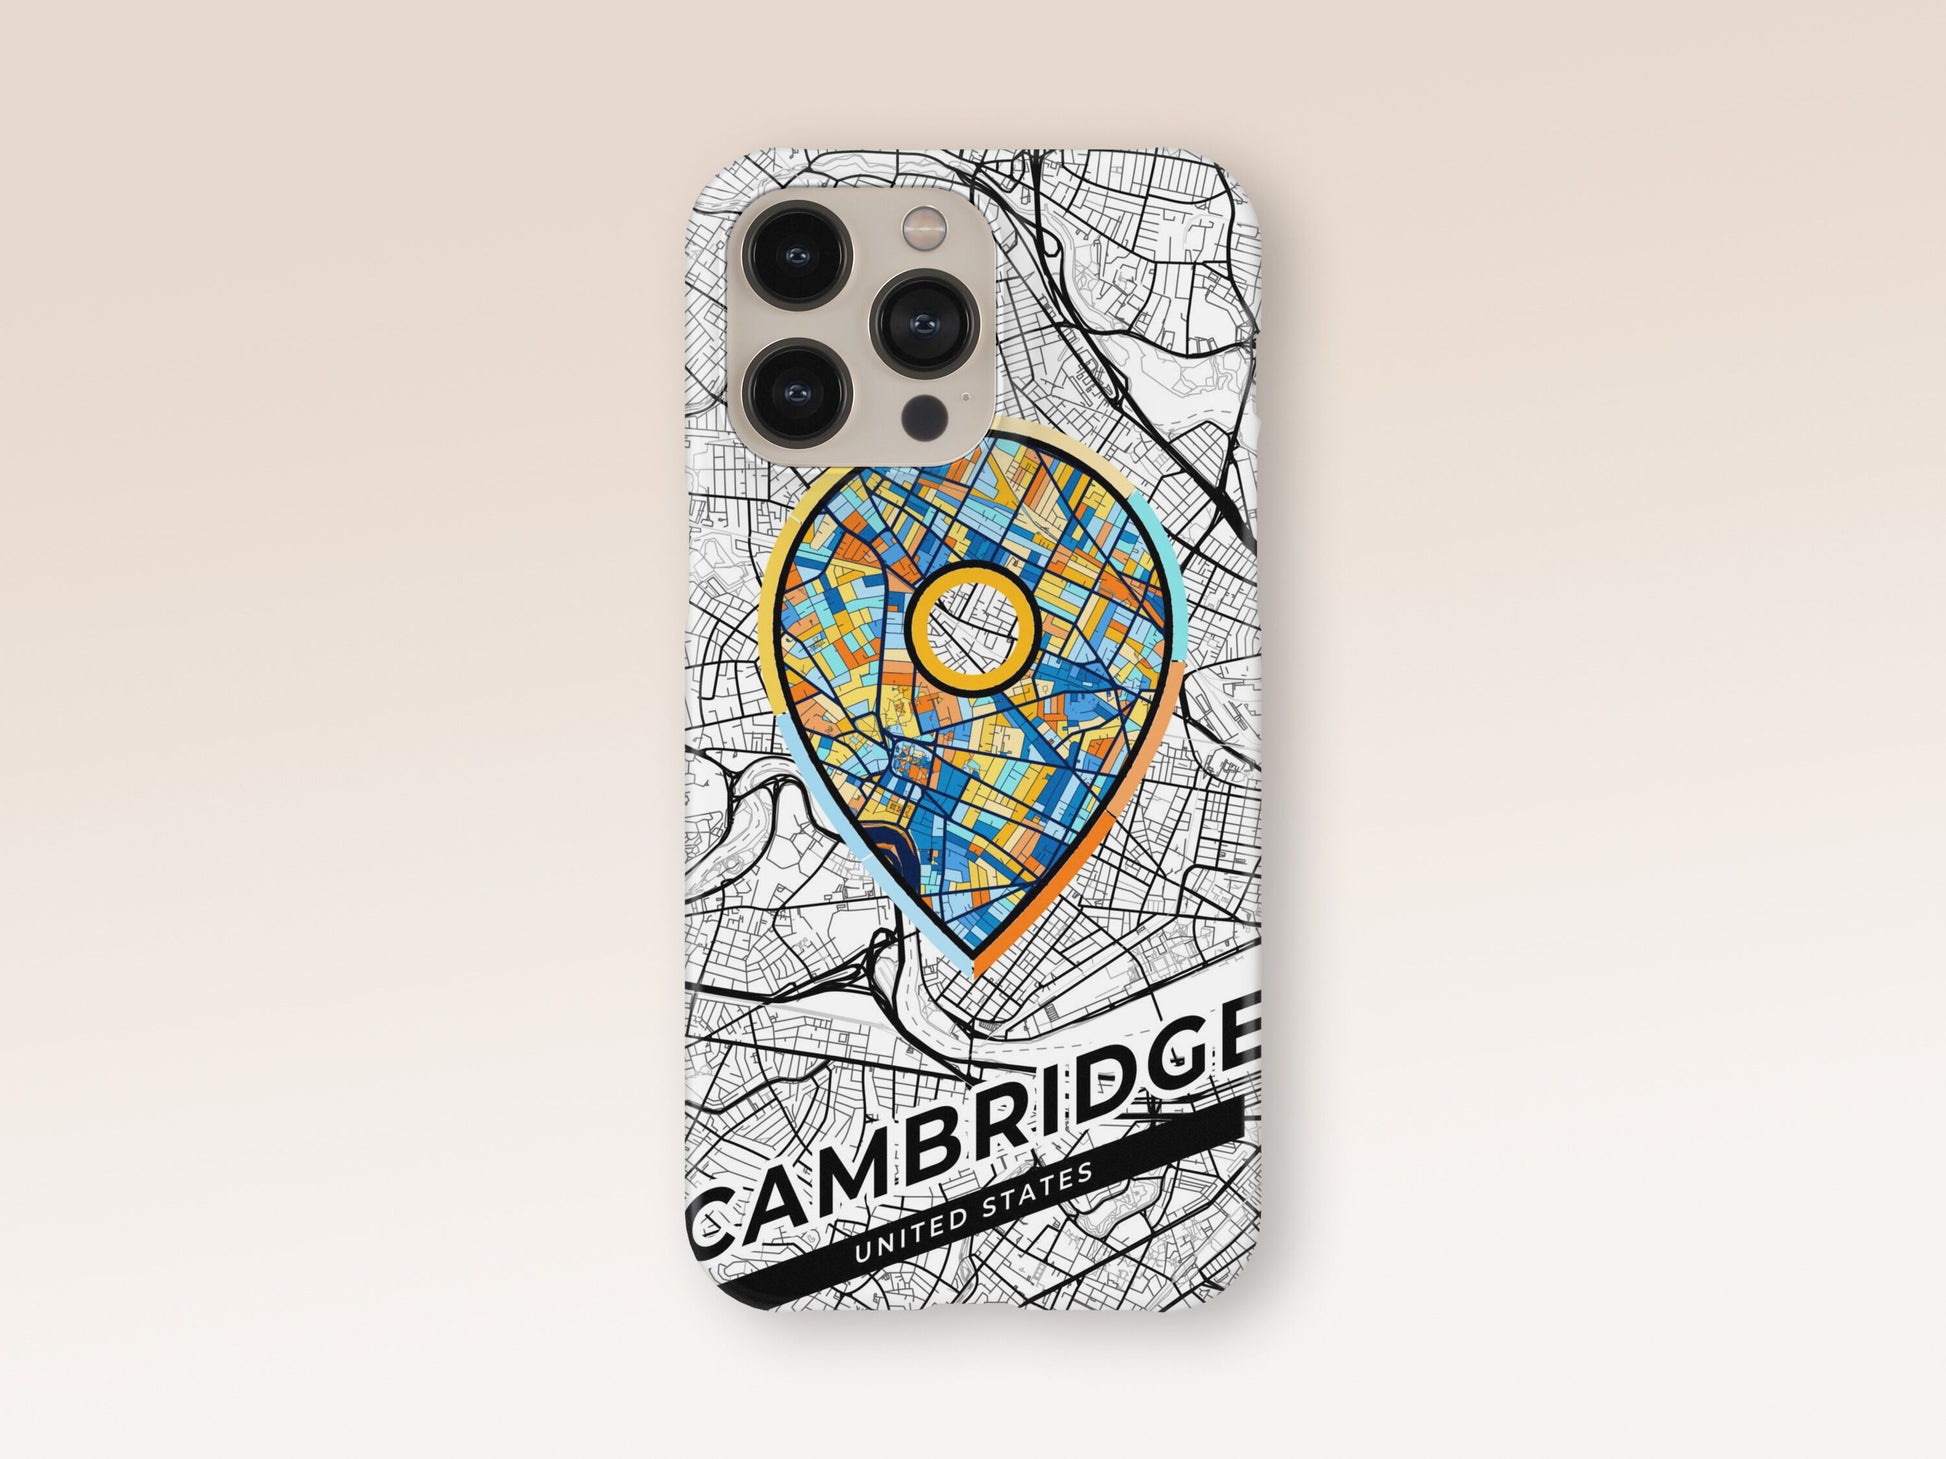 Cambridge Massachusetts slim phone case with colorful icon. Birthday, wedding or housewarming gift. Couple match cases. 1